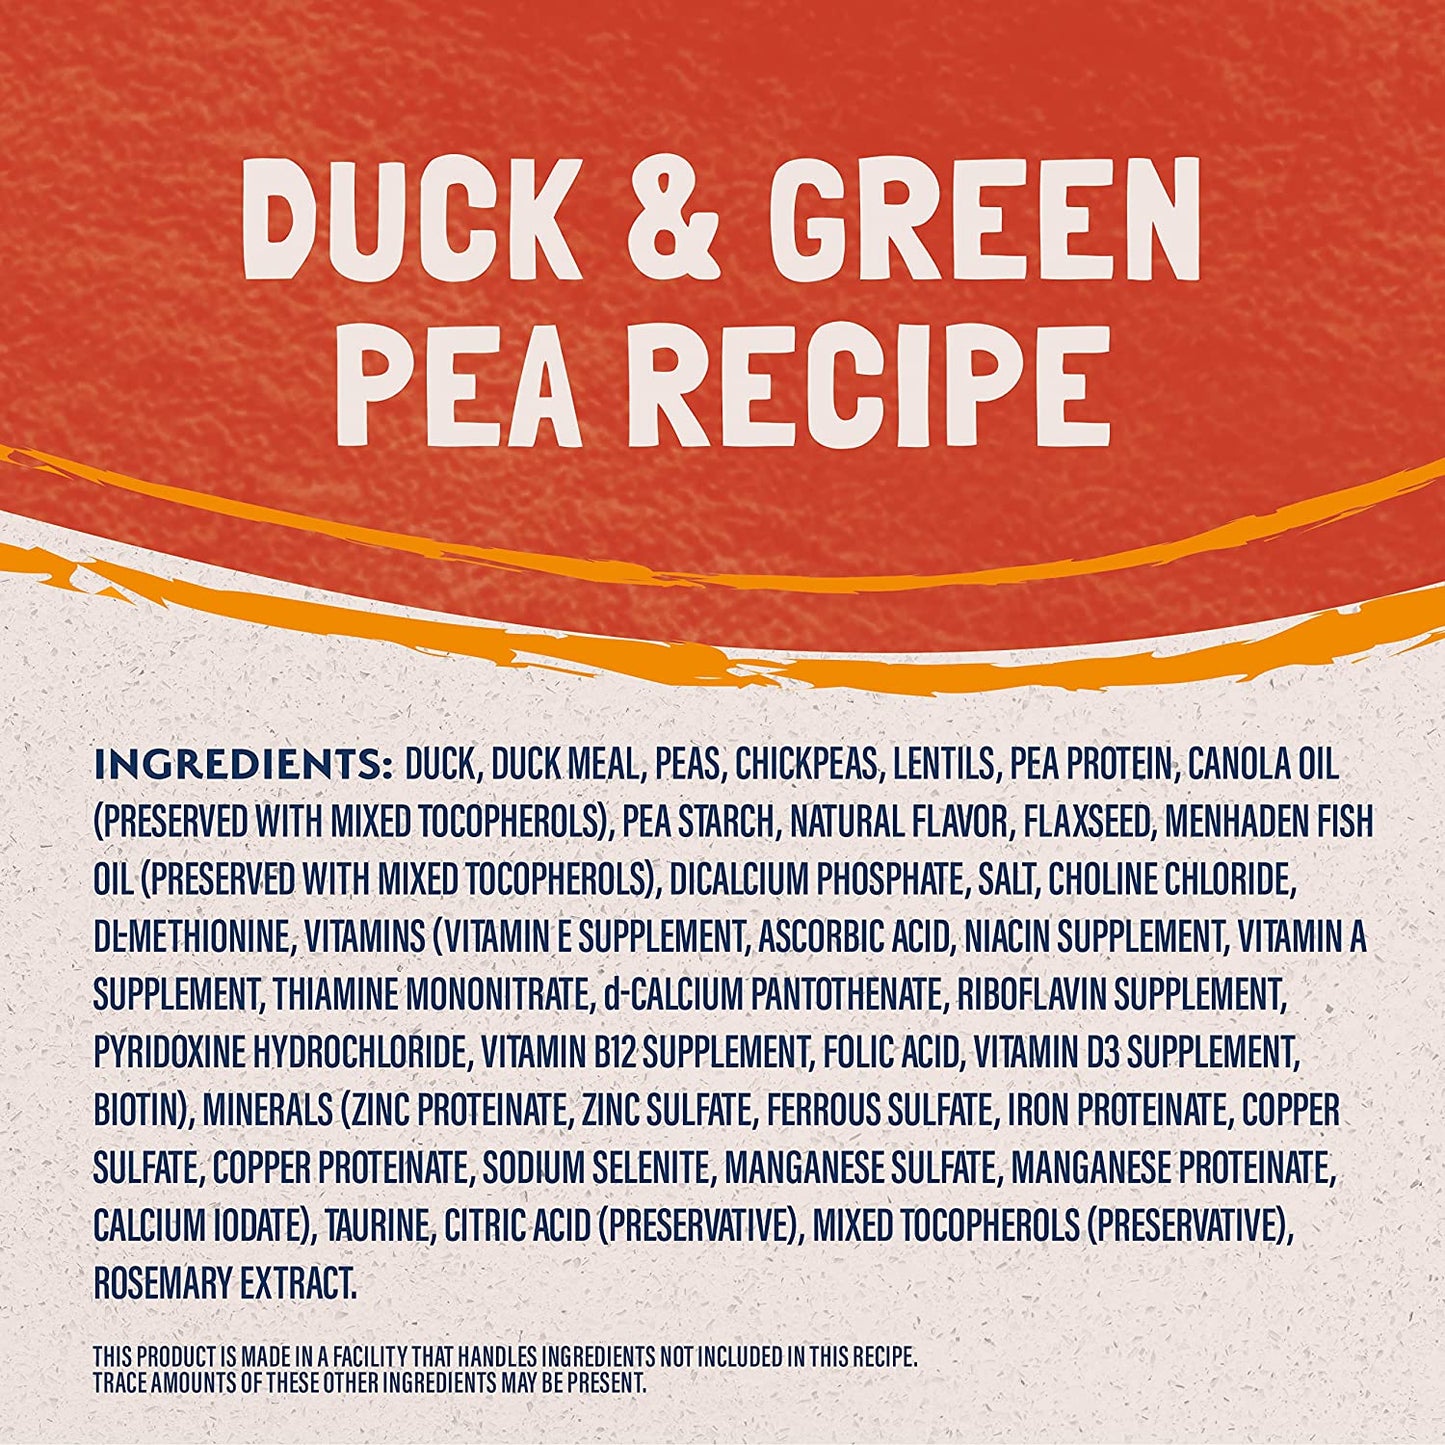 Natural Balance Limited Ingredient Adult Grain-Free Dry Cat Food, Duck & Green Pea Recipe, 10 Pound (Pack of 1)